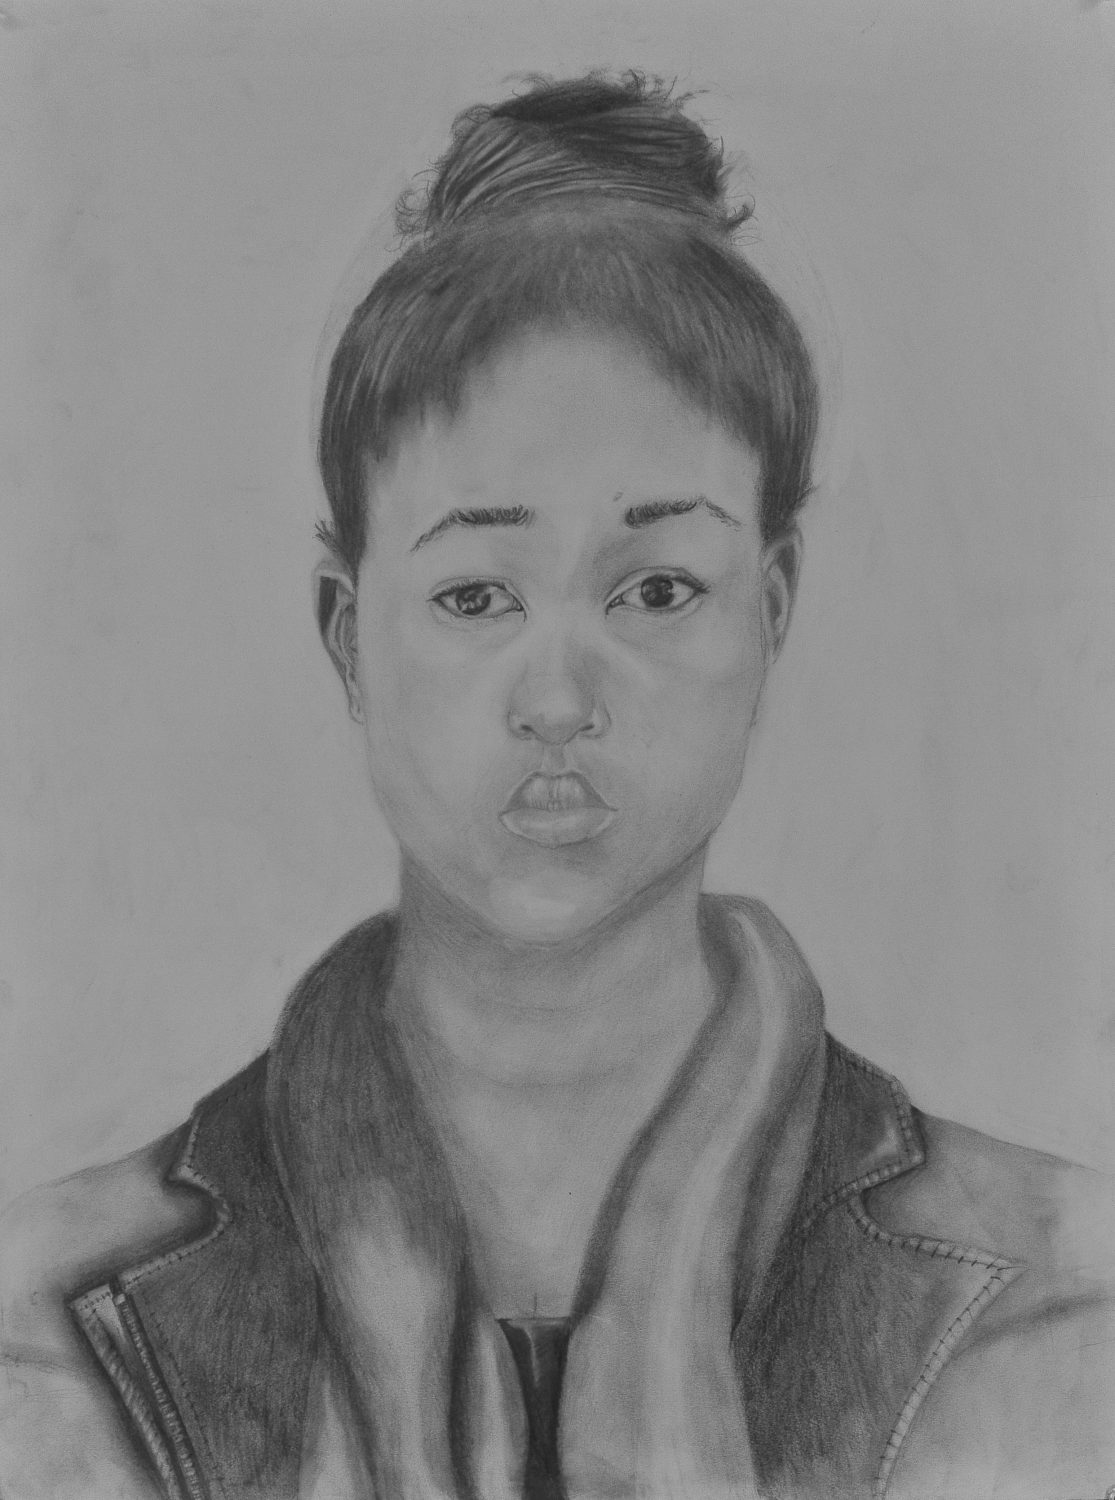 thumbnail of Me, Myself, and I, by Sibulelo Mnisi. Medium: Graphite on Paper. Size 24 x 18 inches Date 2014